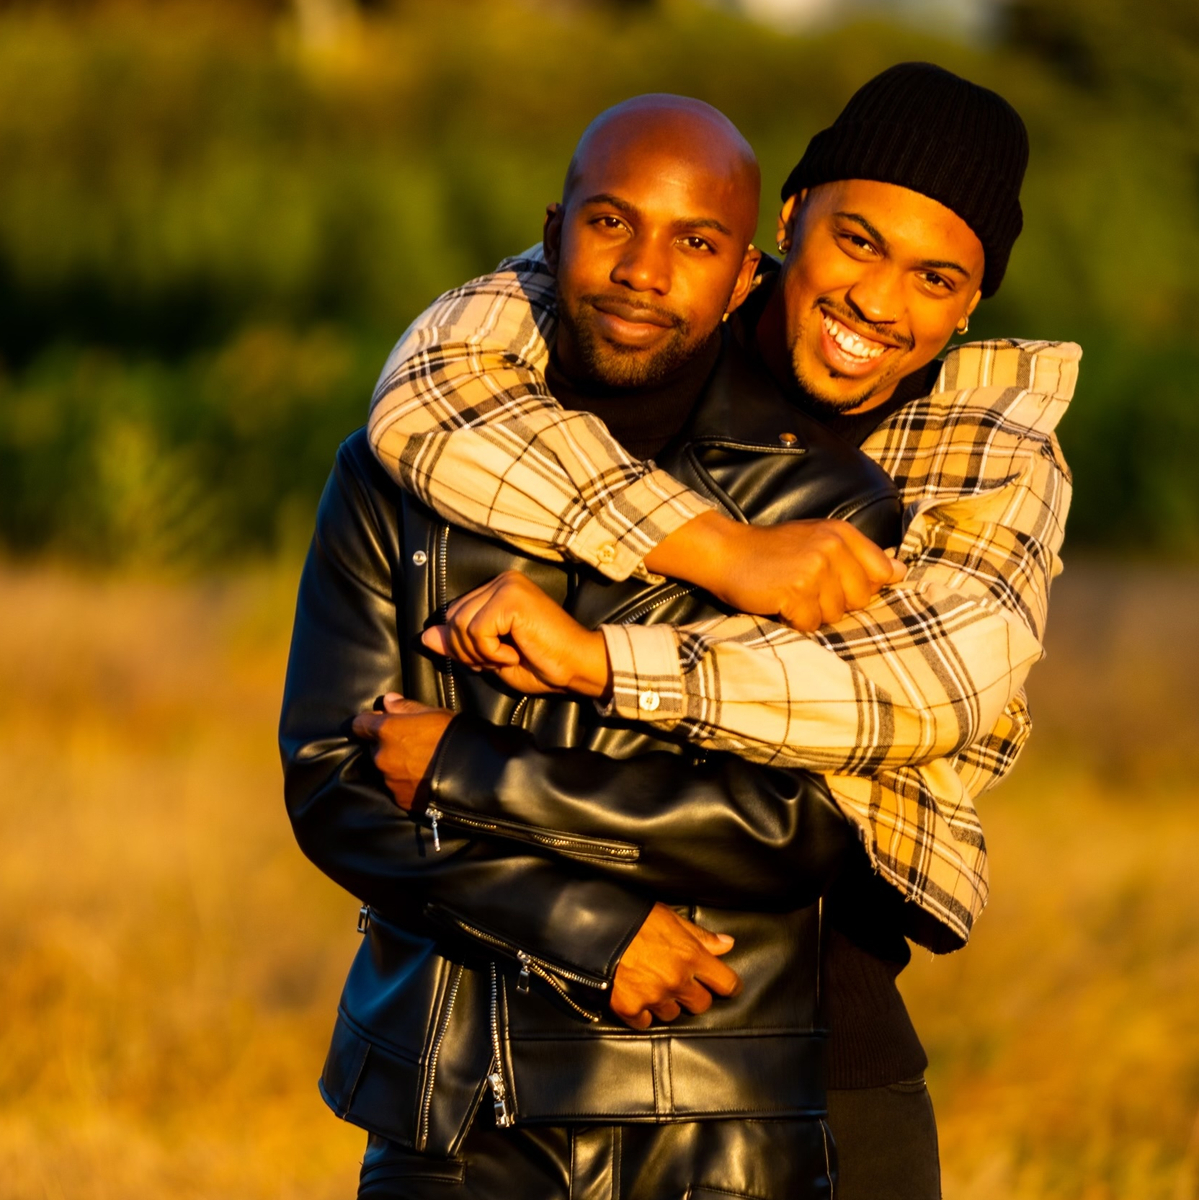 TikTokers Terrell and Jarius Joseph Are Here to Normalize All Families